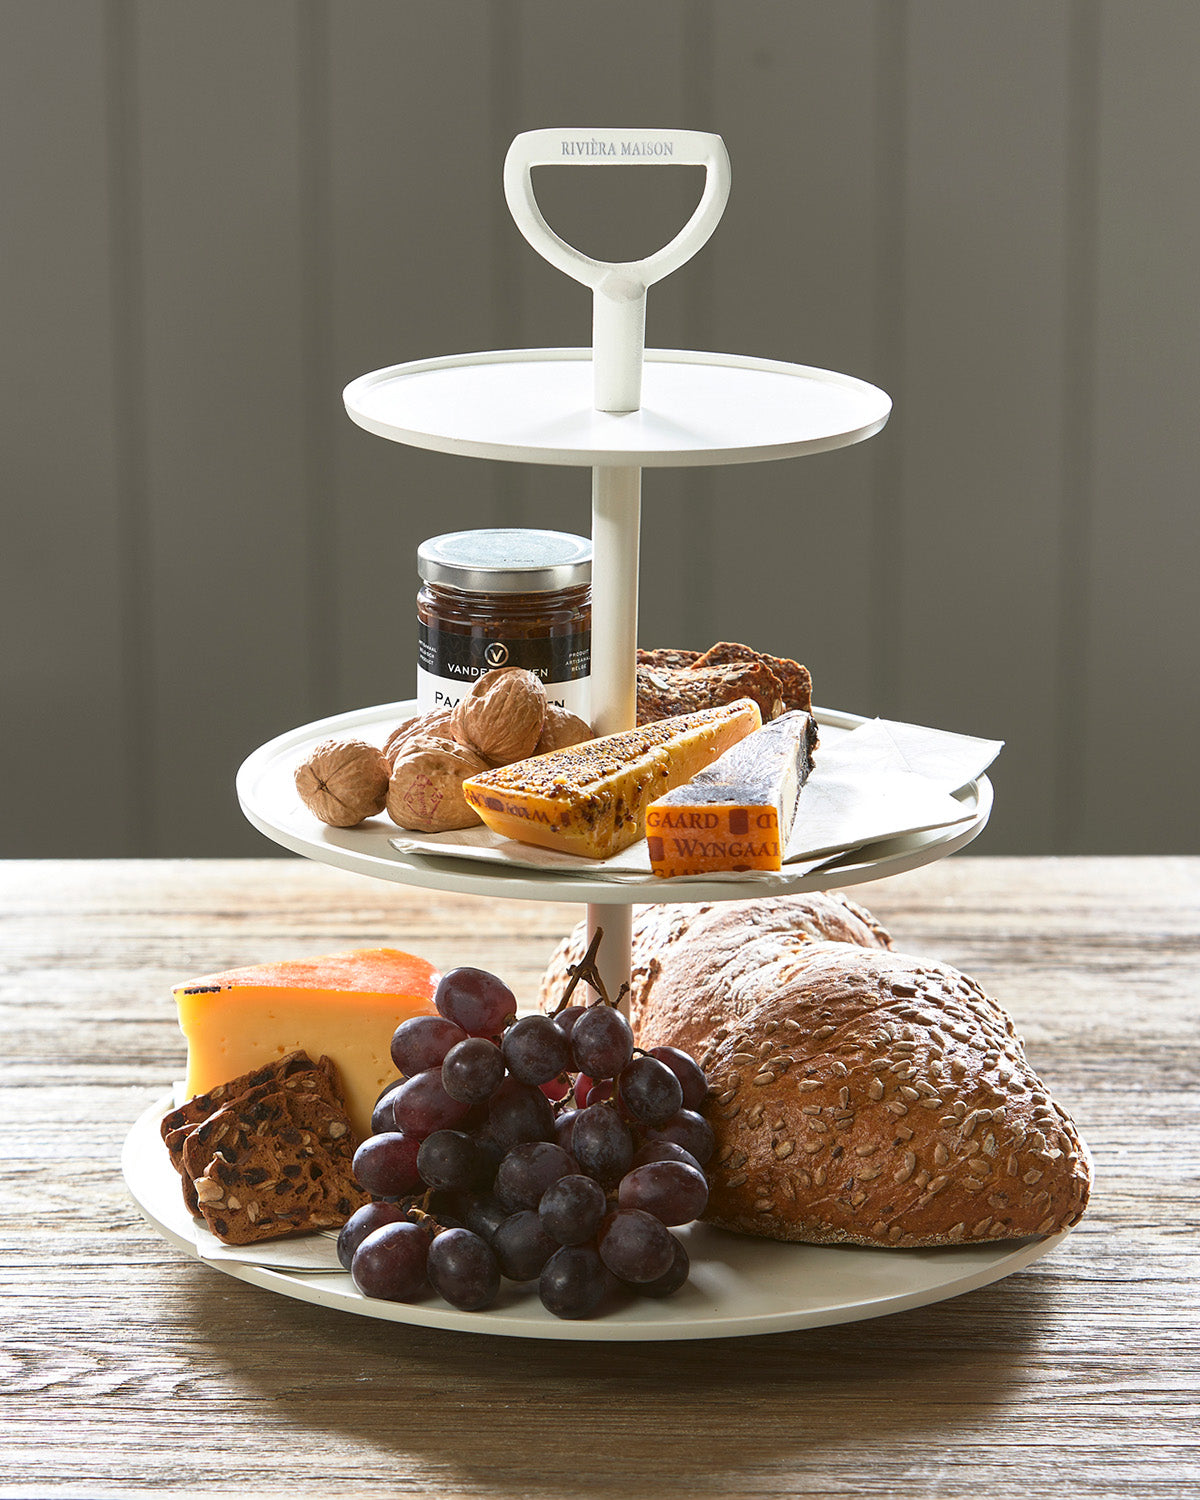 ETAGÈRE white color made of aluminum, decorated with bread, cheese, fruits, and jam